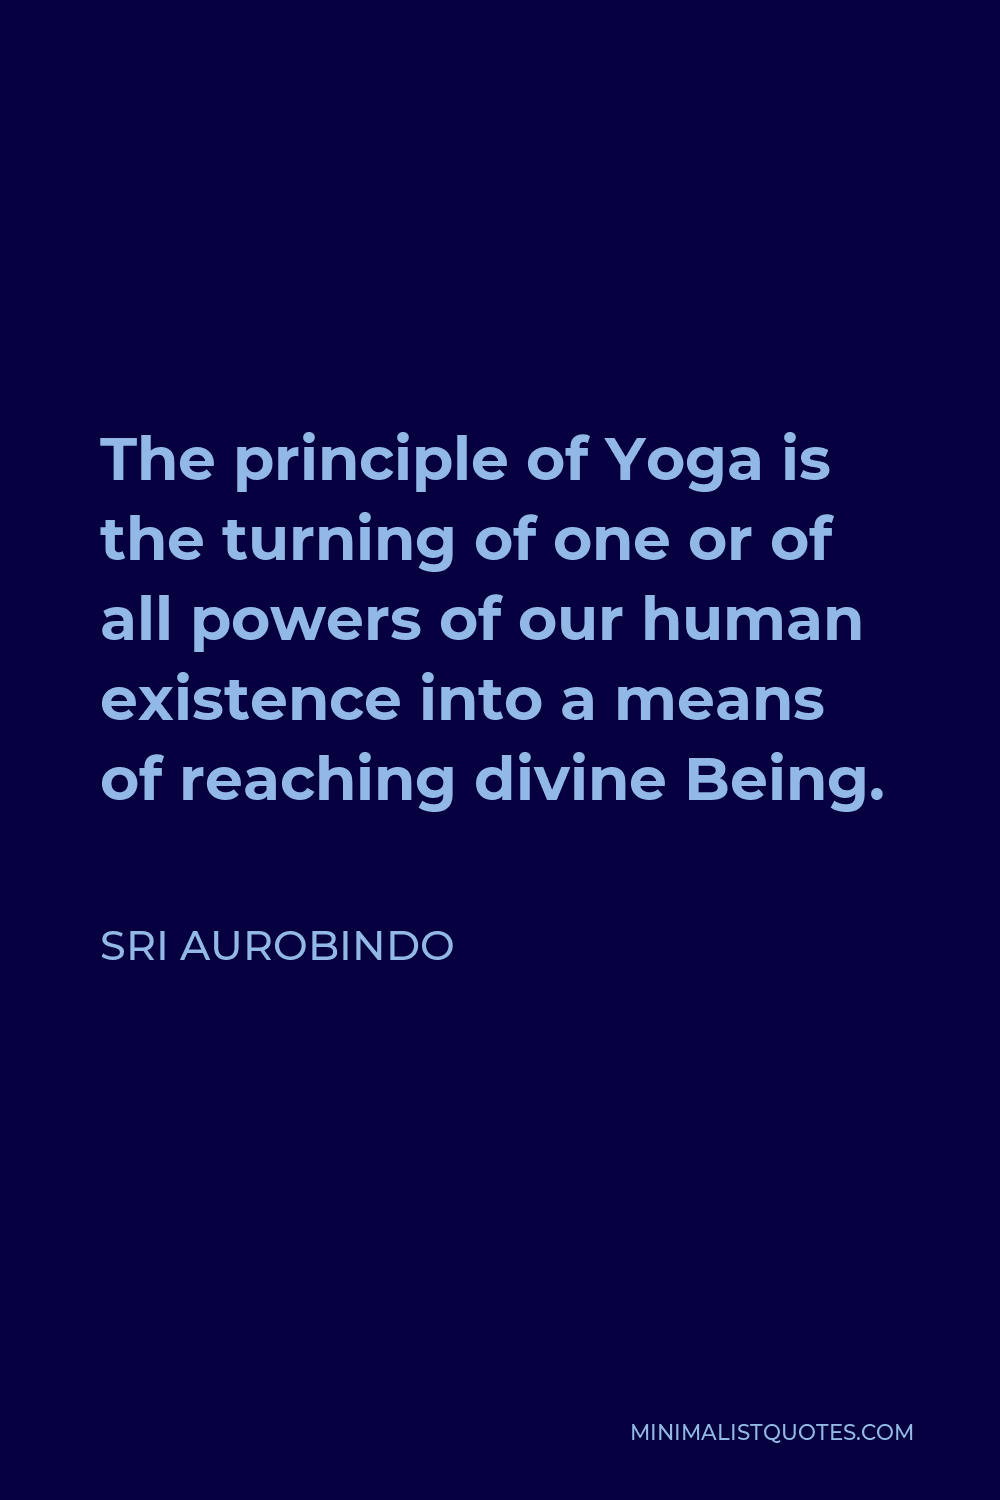 Sri Aurobindo Quote - The principle of Yoga is the turning of one or of all powers of our human existence into a means of reaching divine Being.